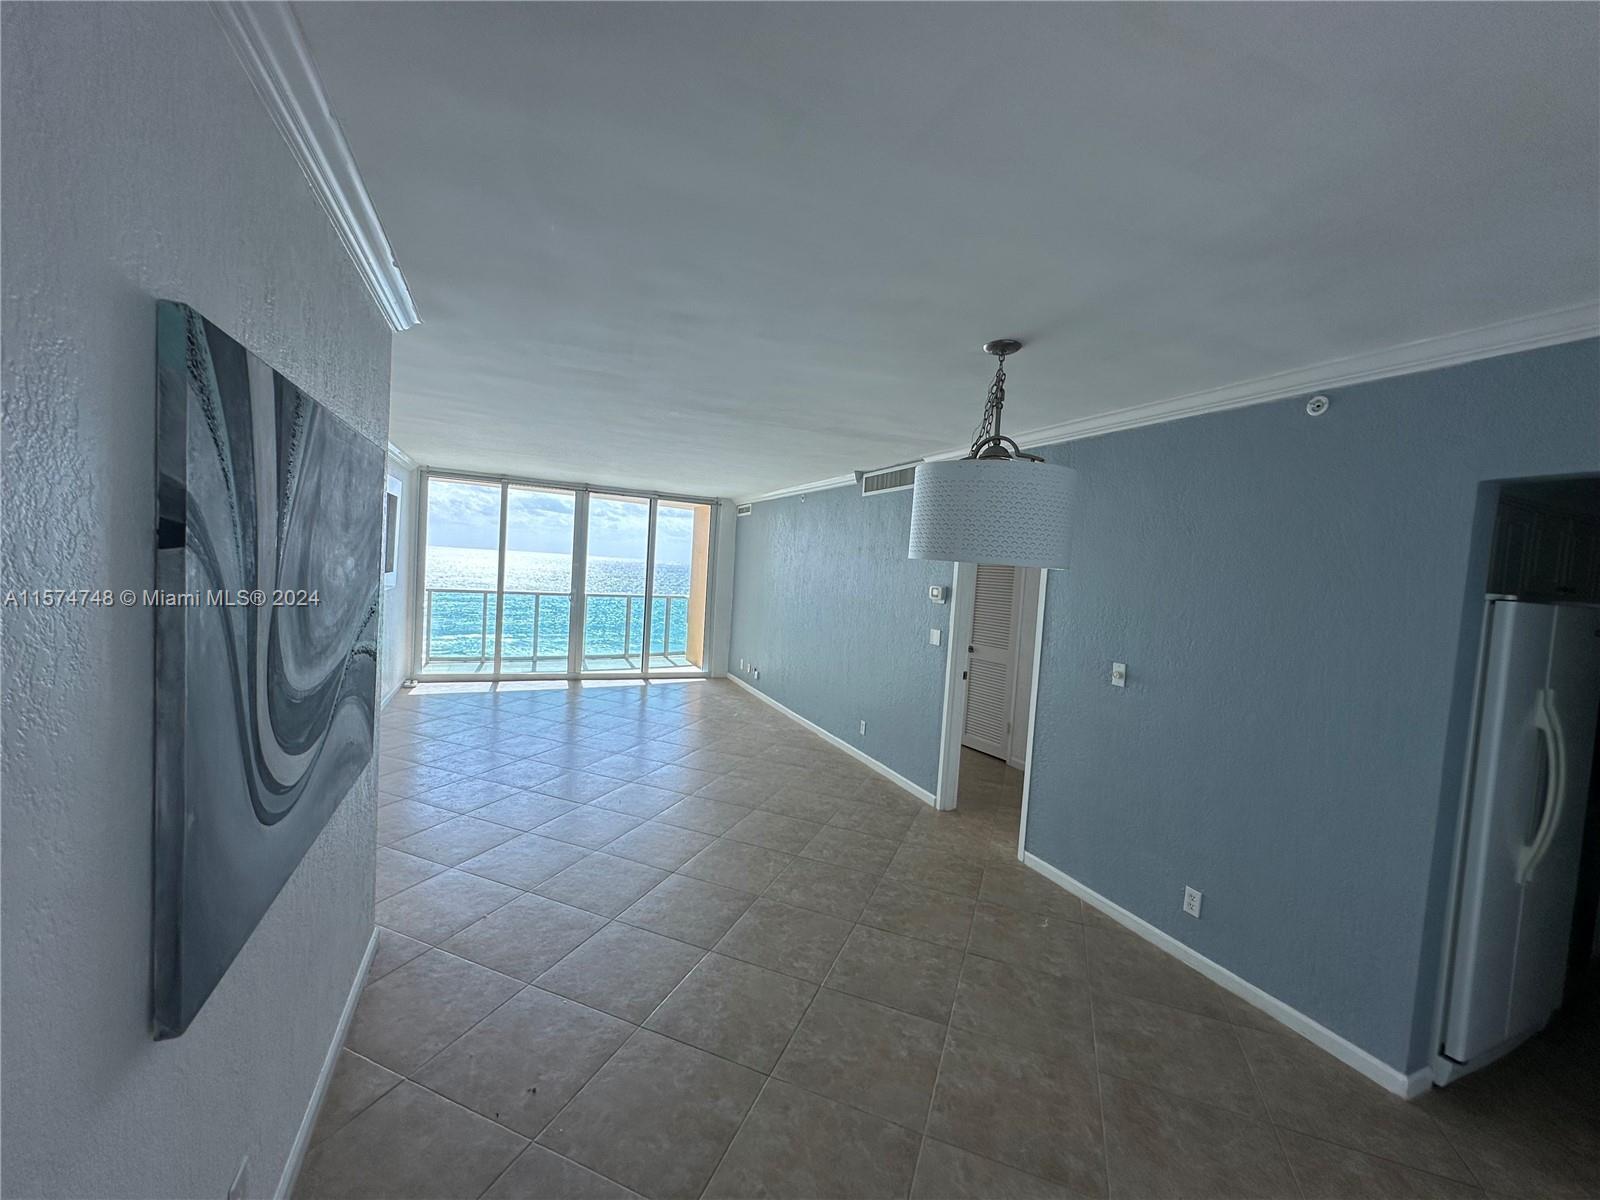 Photo of 2501 S Ocean Dr #1121 in Hollywood, FL